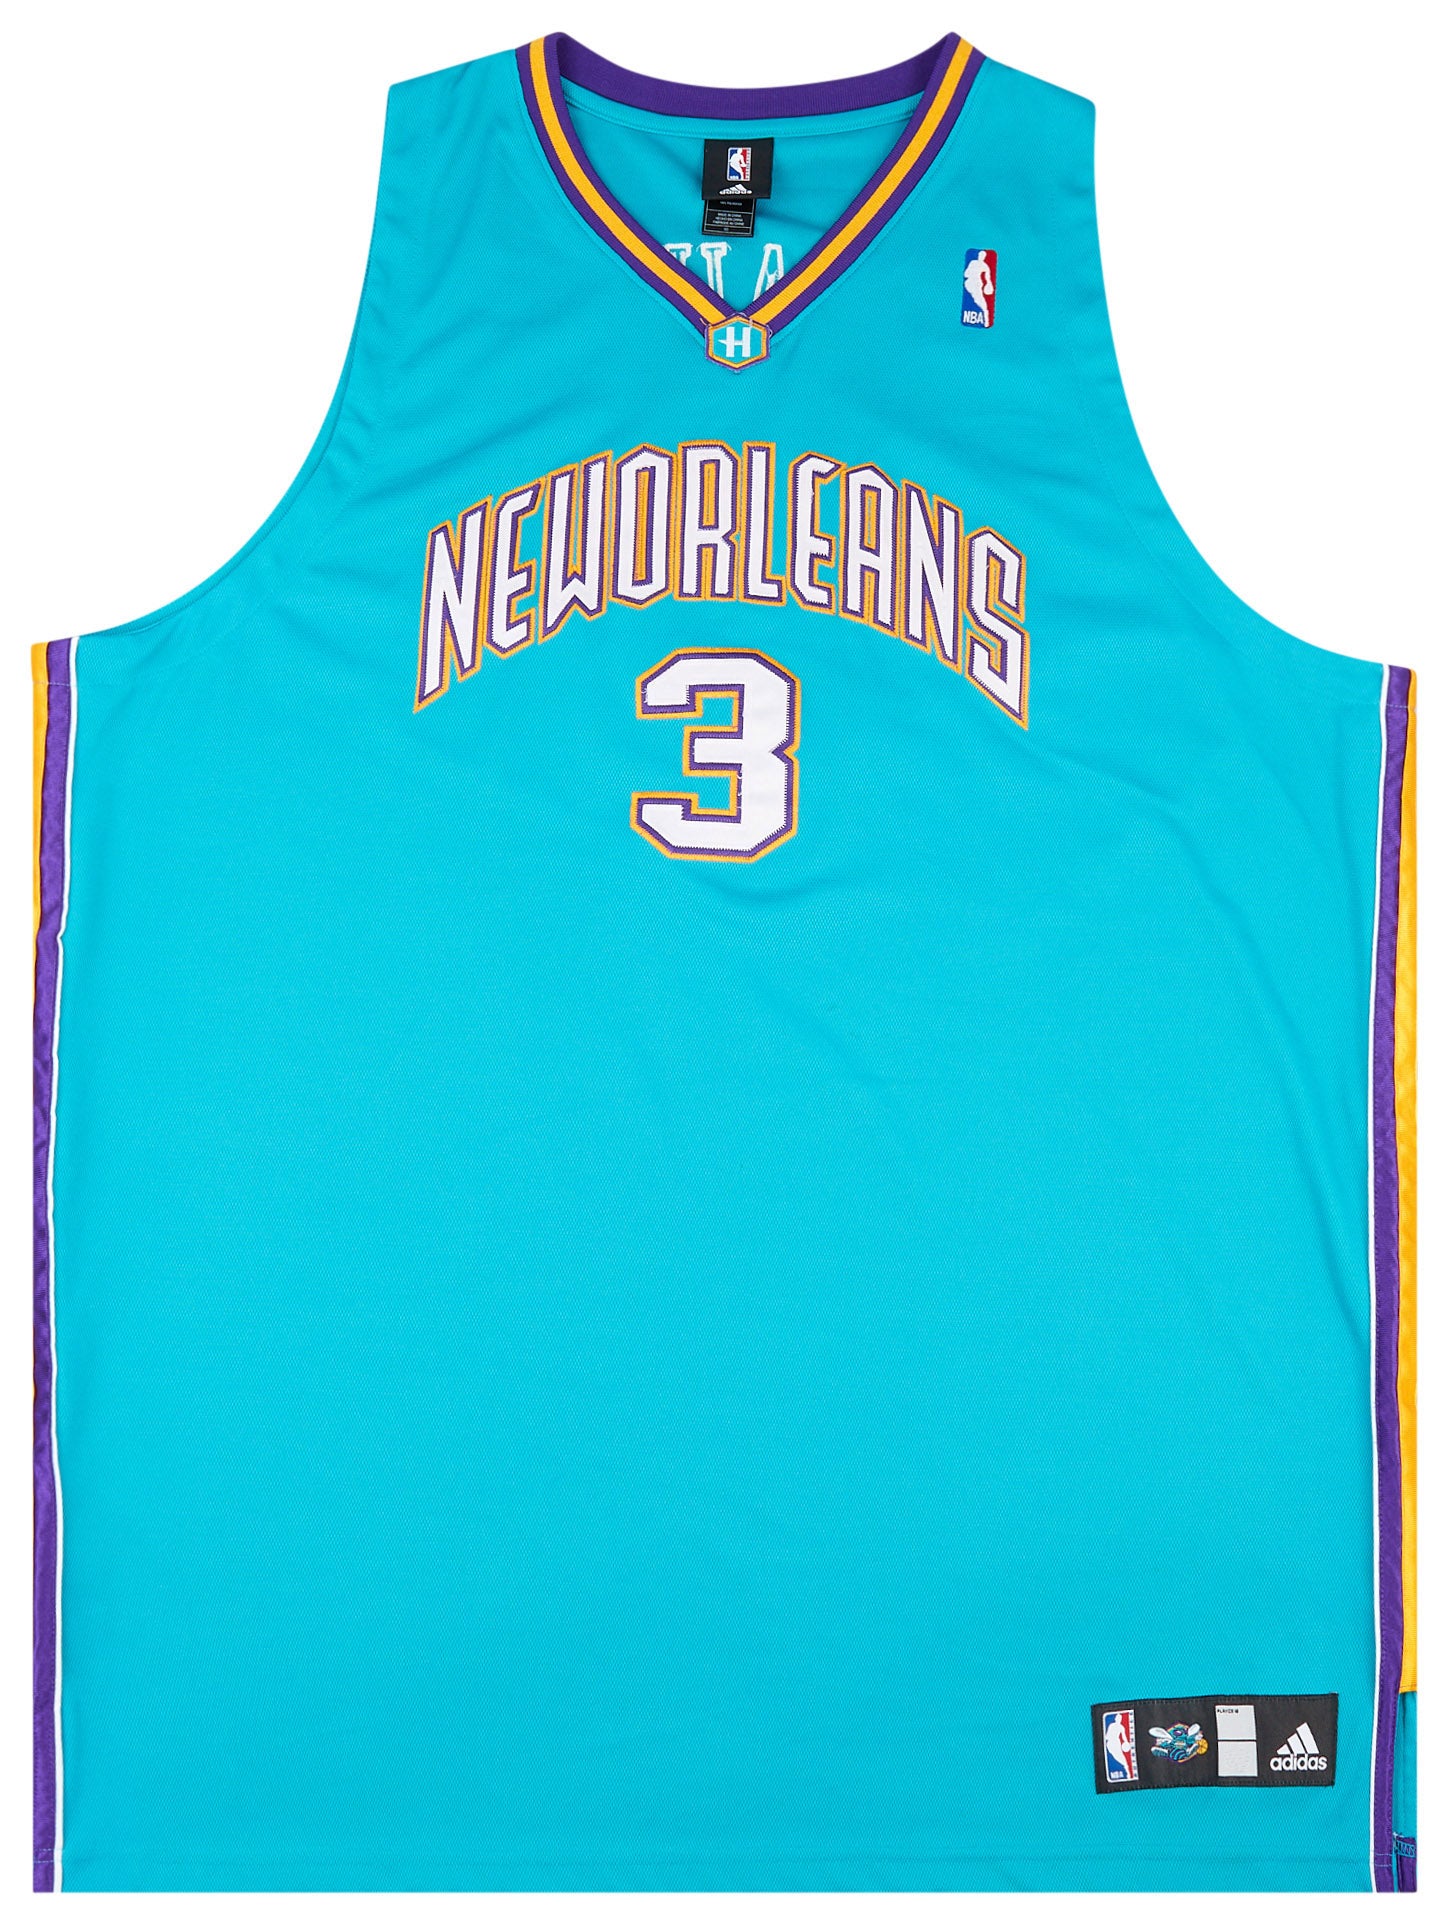 2006-08 AUTHENTIC NEW ORLEANS HORNETS PAUL #3 ADIDAS JERSEY (AWAY) 4XL -  Classic American Sports